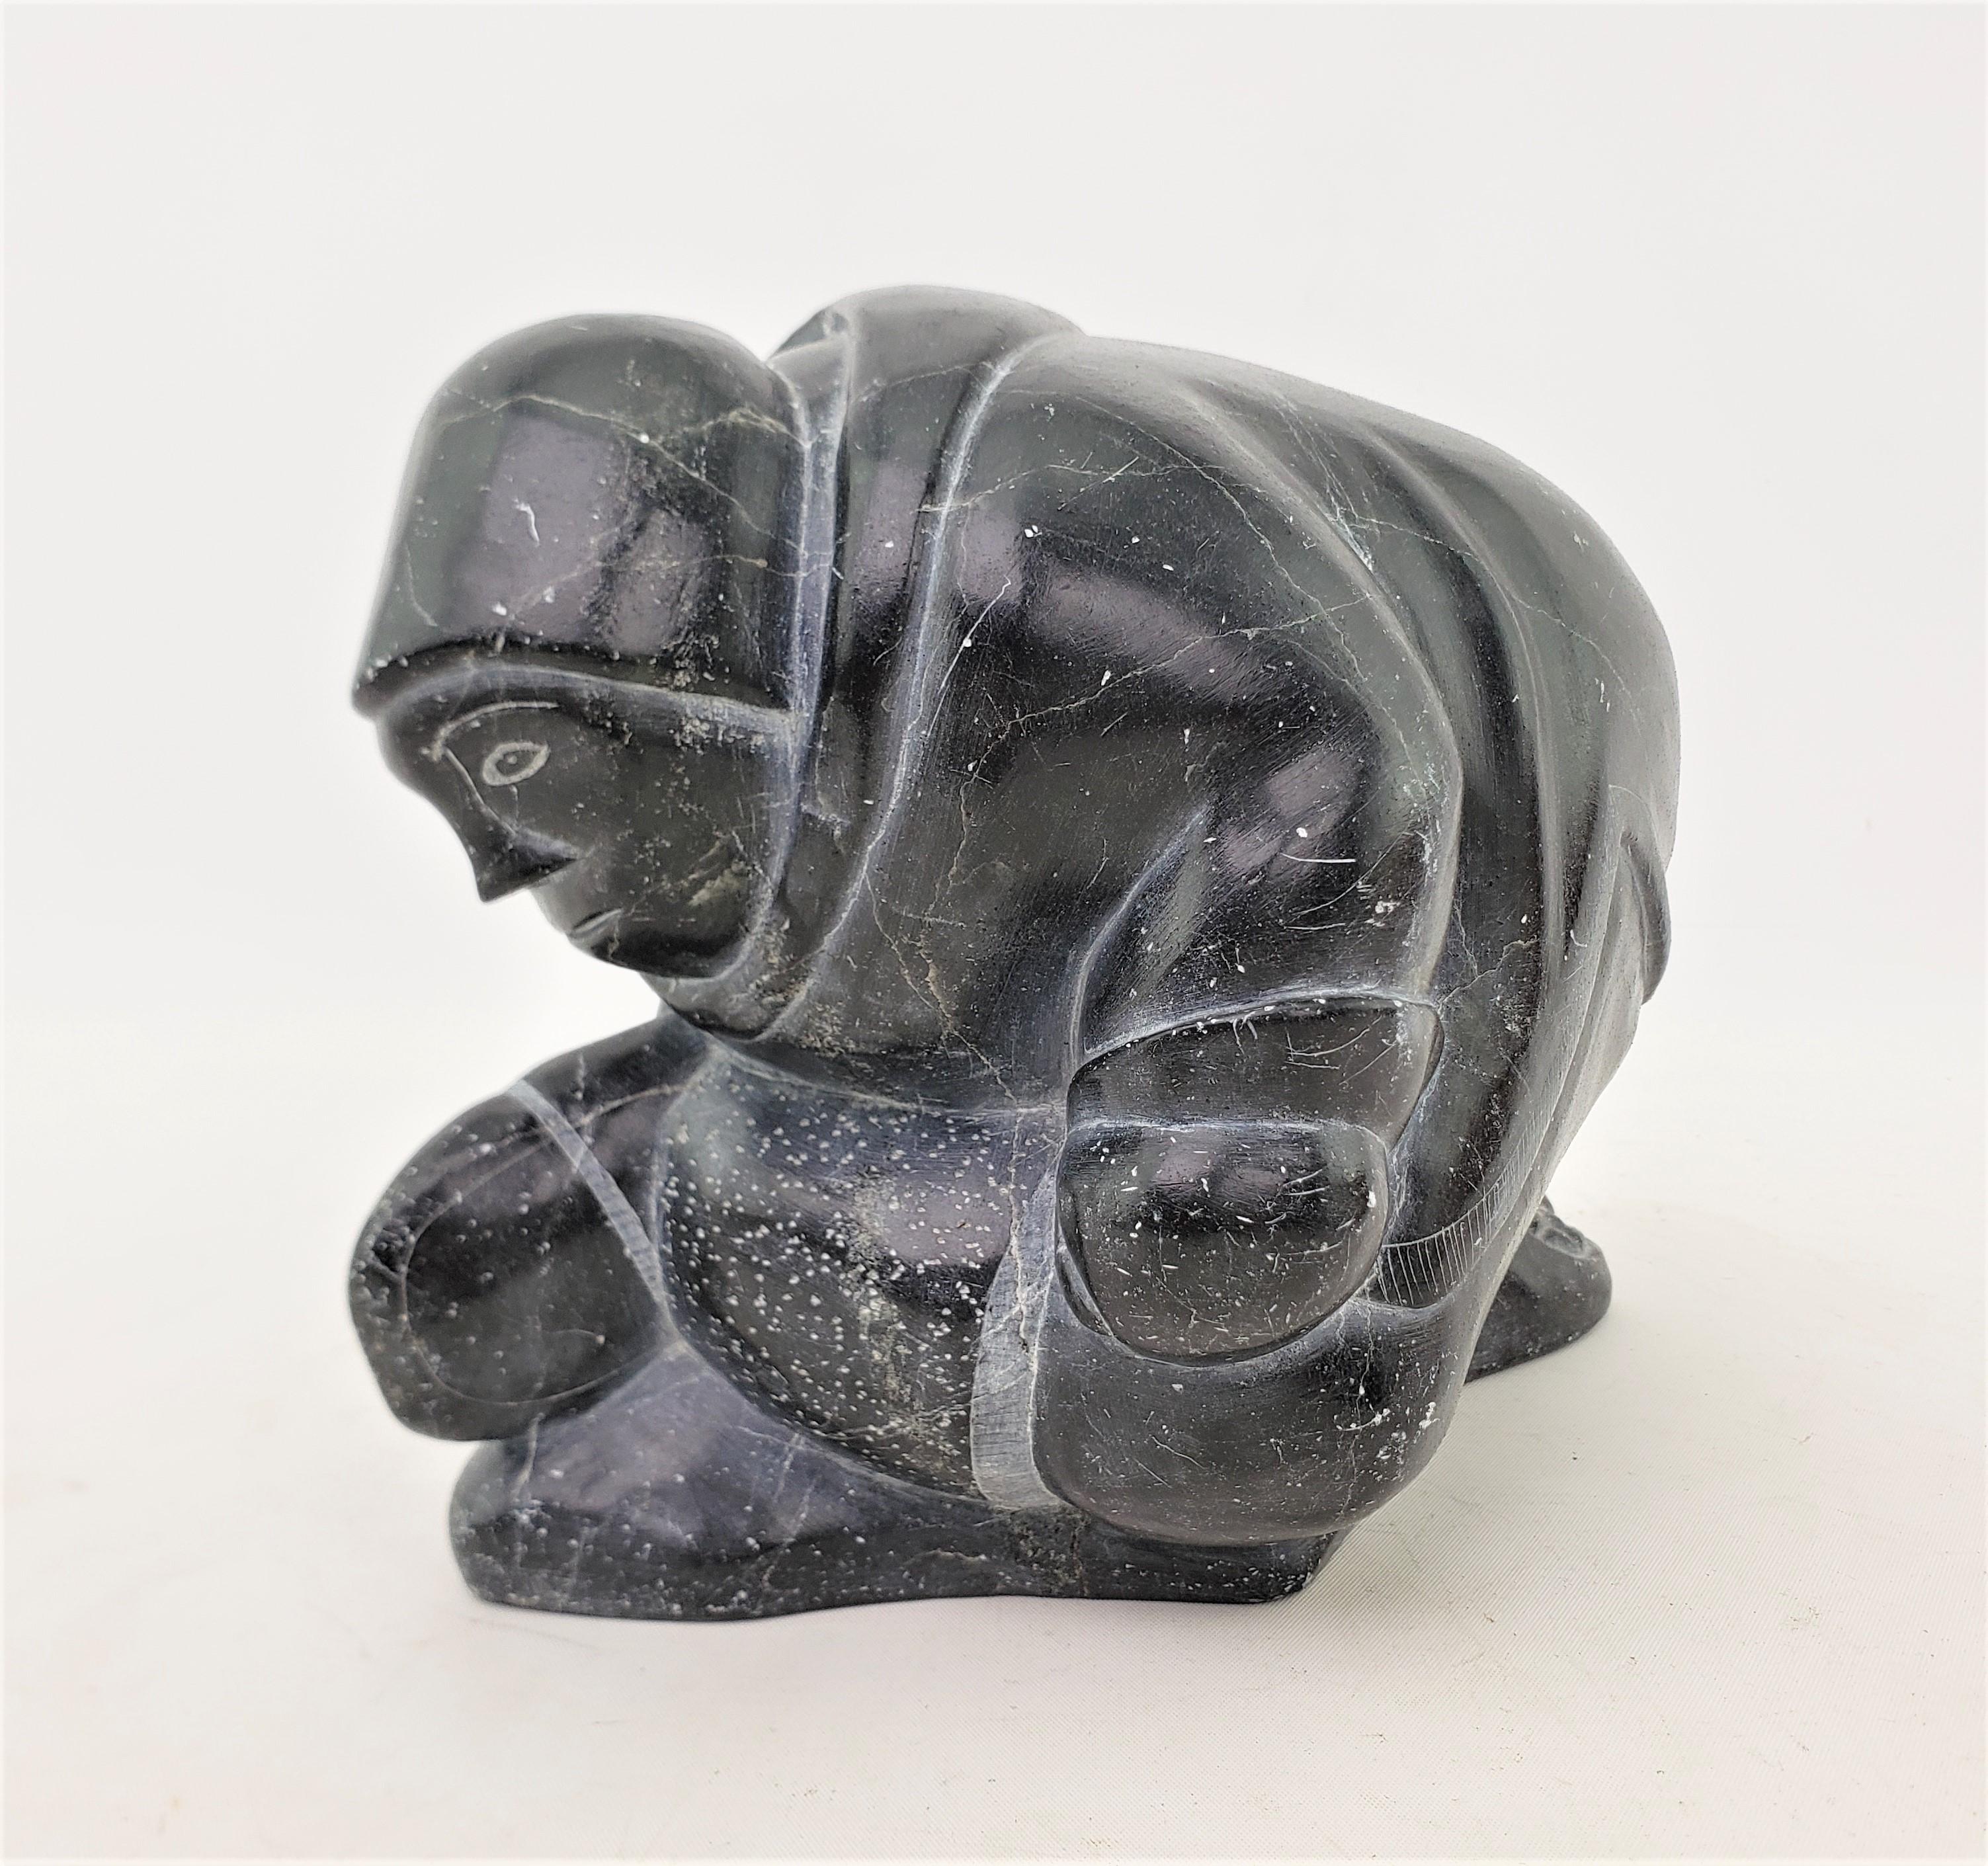 This soapstone figurative sculpture is unsigned, but presumed to have originated from Canada and date to approximately 1965 and done in the Inuit style. This hand-carved soapstone carving depicts an adult Inuit wearing a parka, and kneeling on the